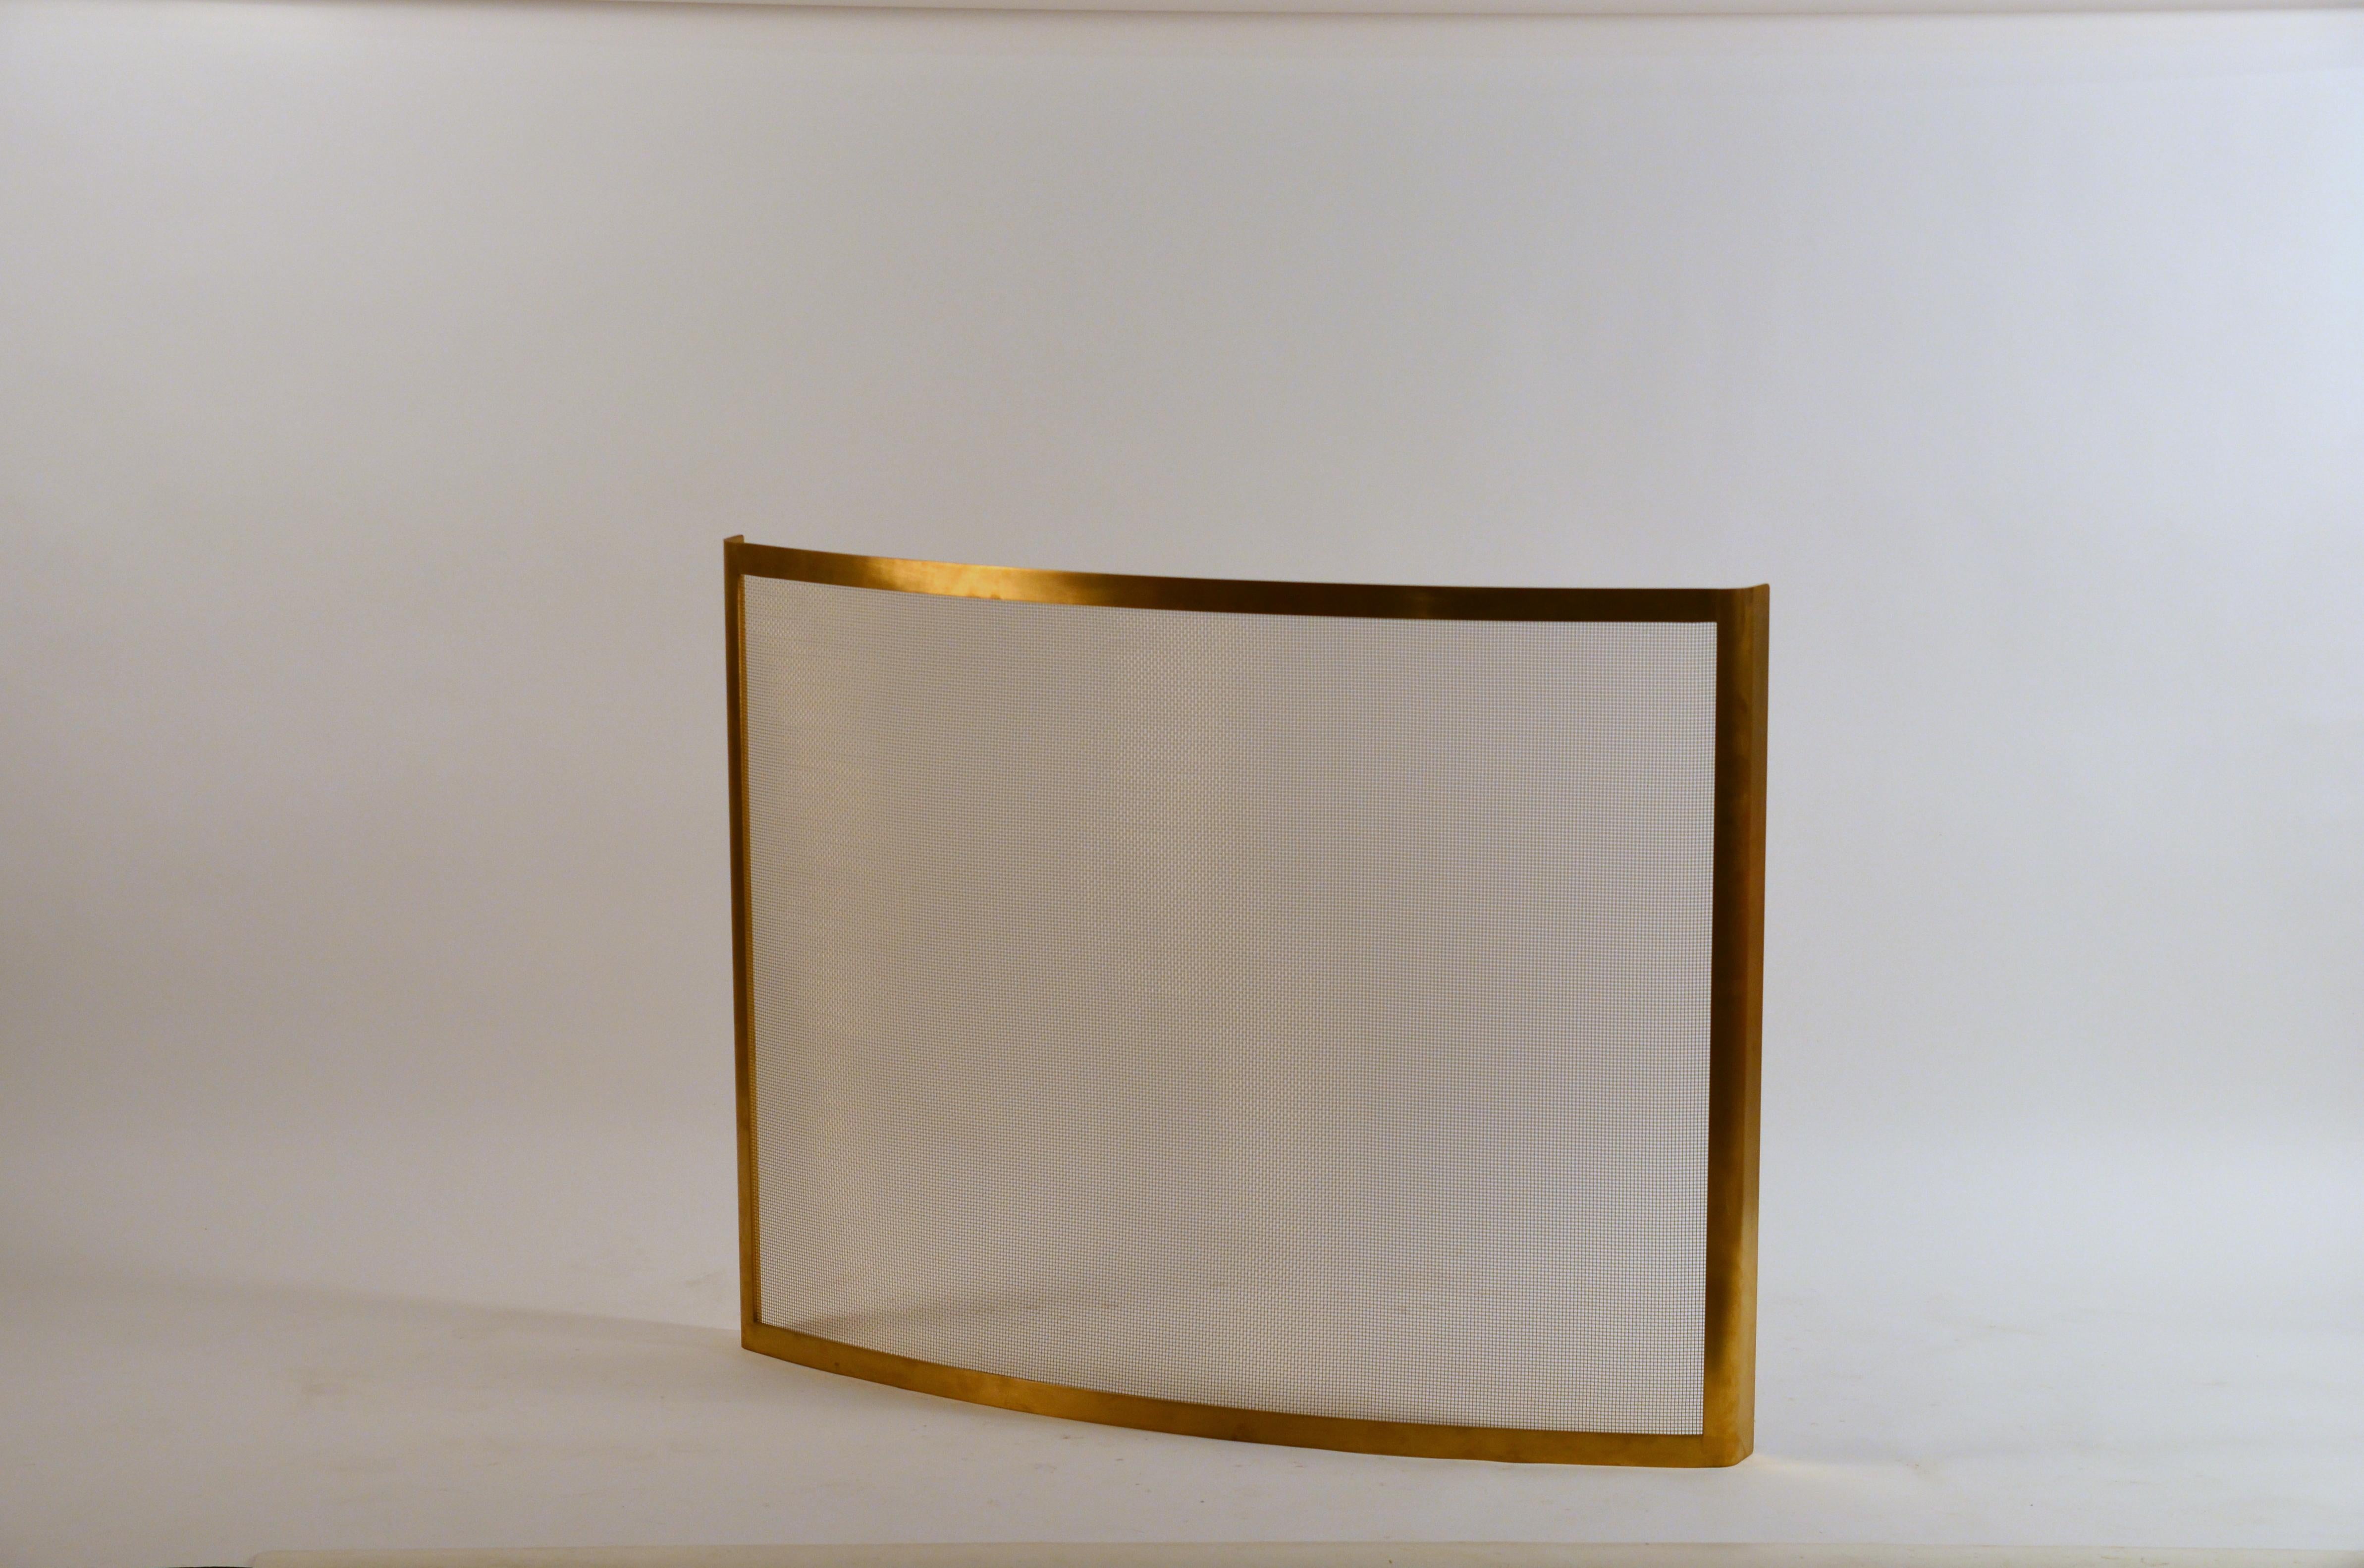 Large solid polished brass fireplace screen.

Simple, Minimalist bowed design.